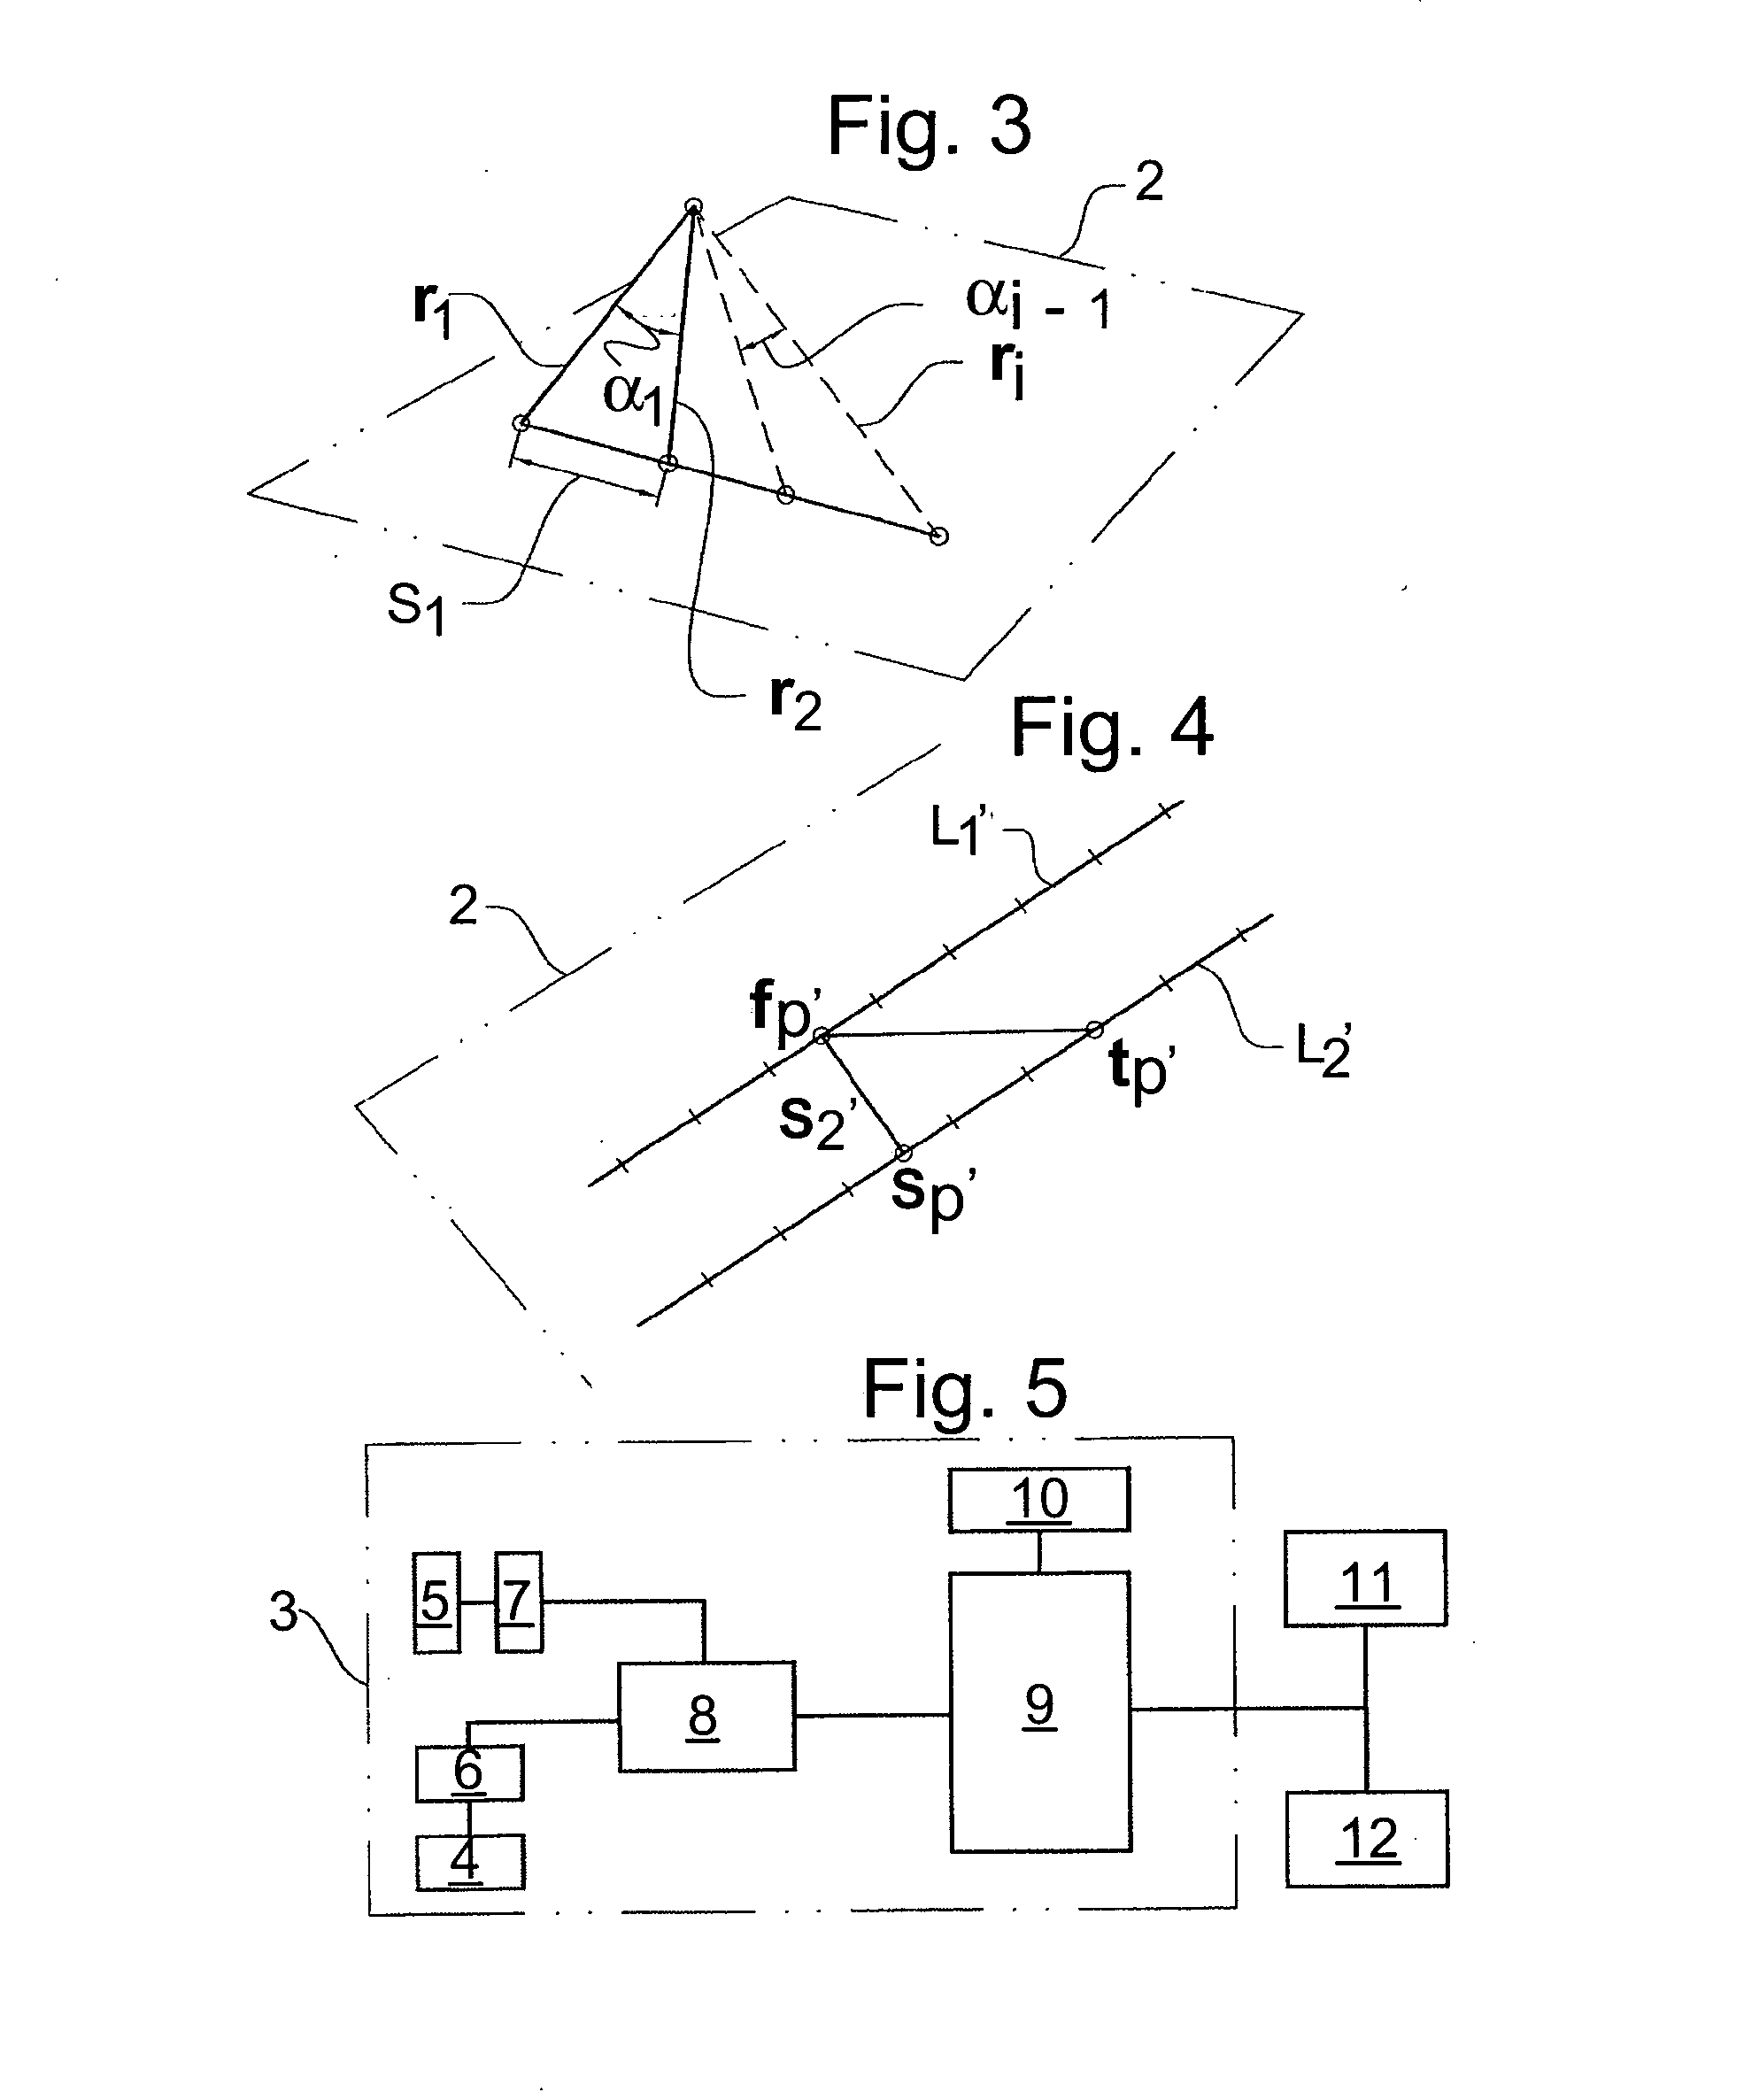 Centering above a predetermined area of a landing platform